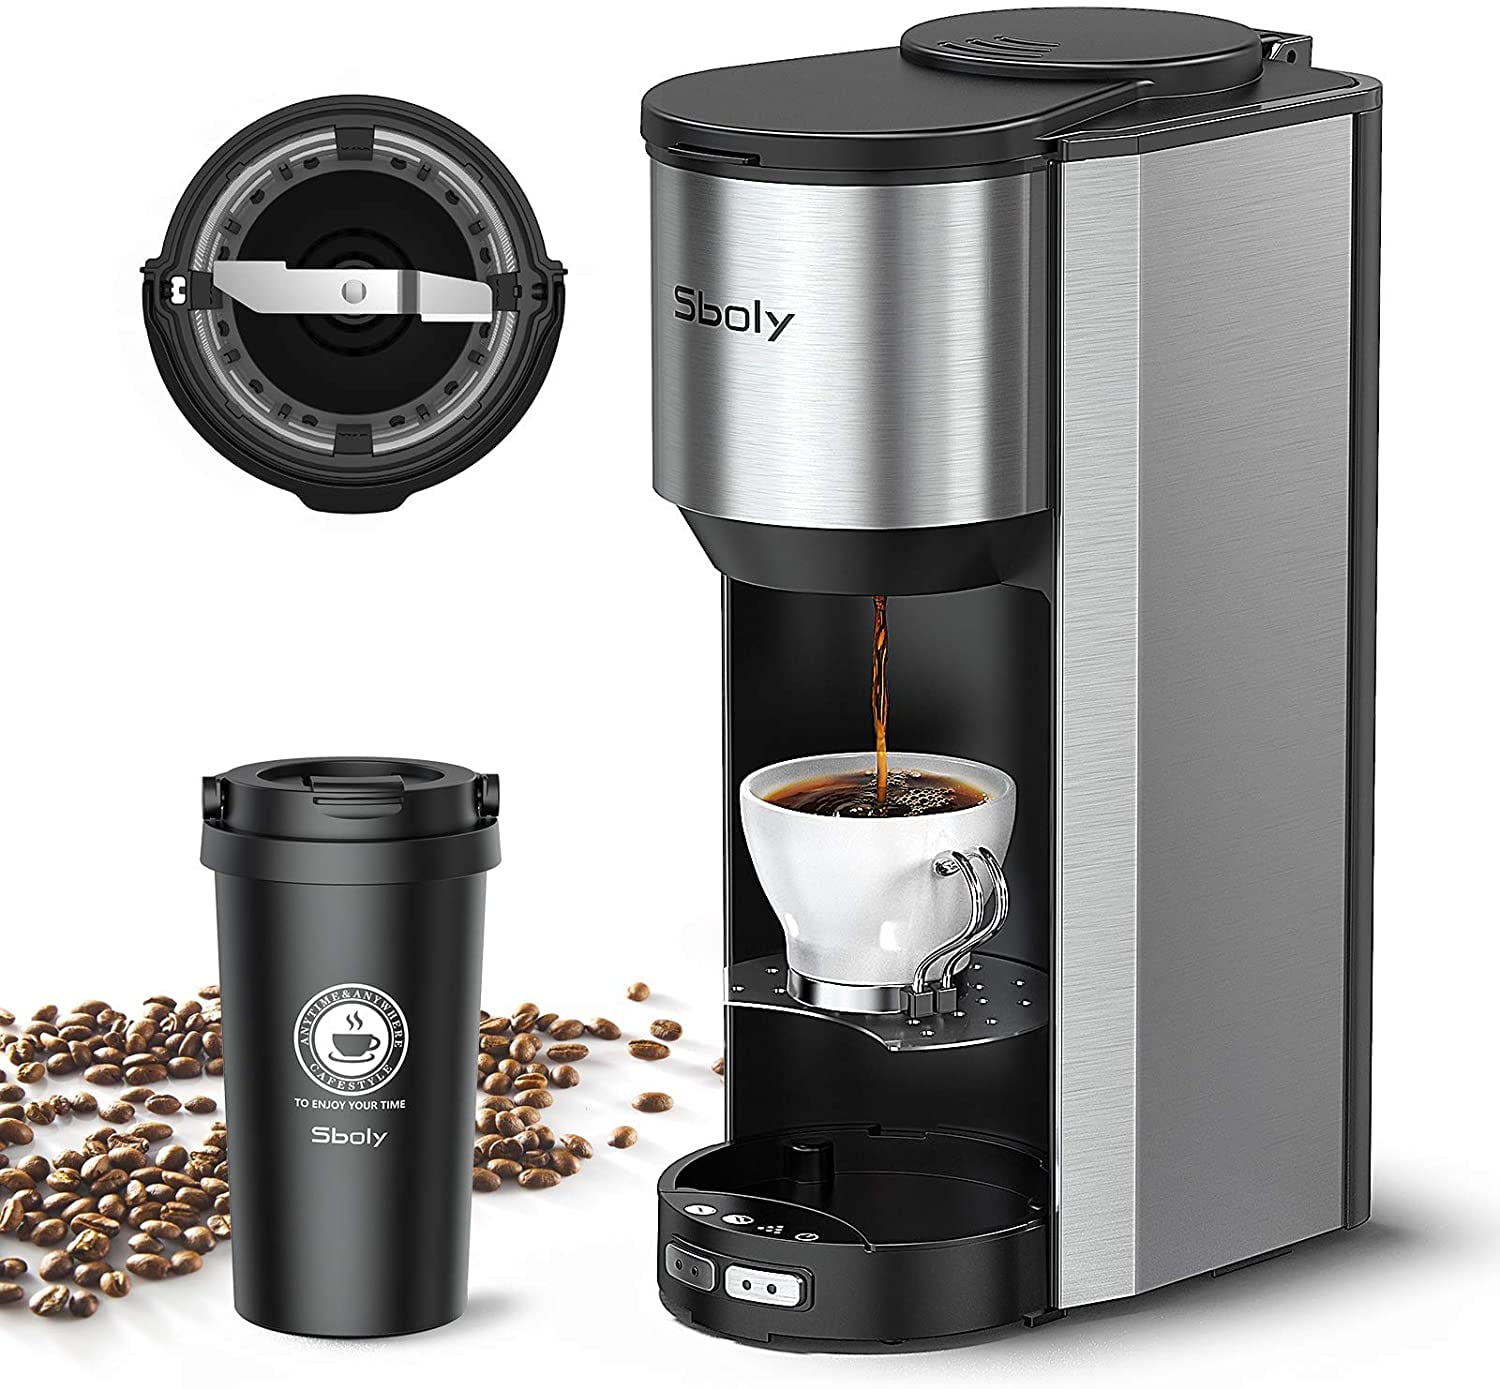 Details about   Sboly 2 In 1 Coffee Machine with Travel Mug K-cup Pod Ground Coffee 3min Single 